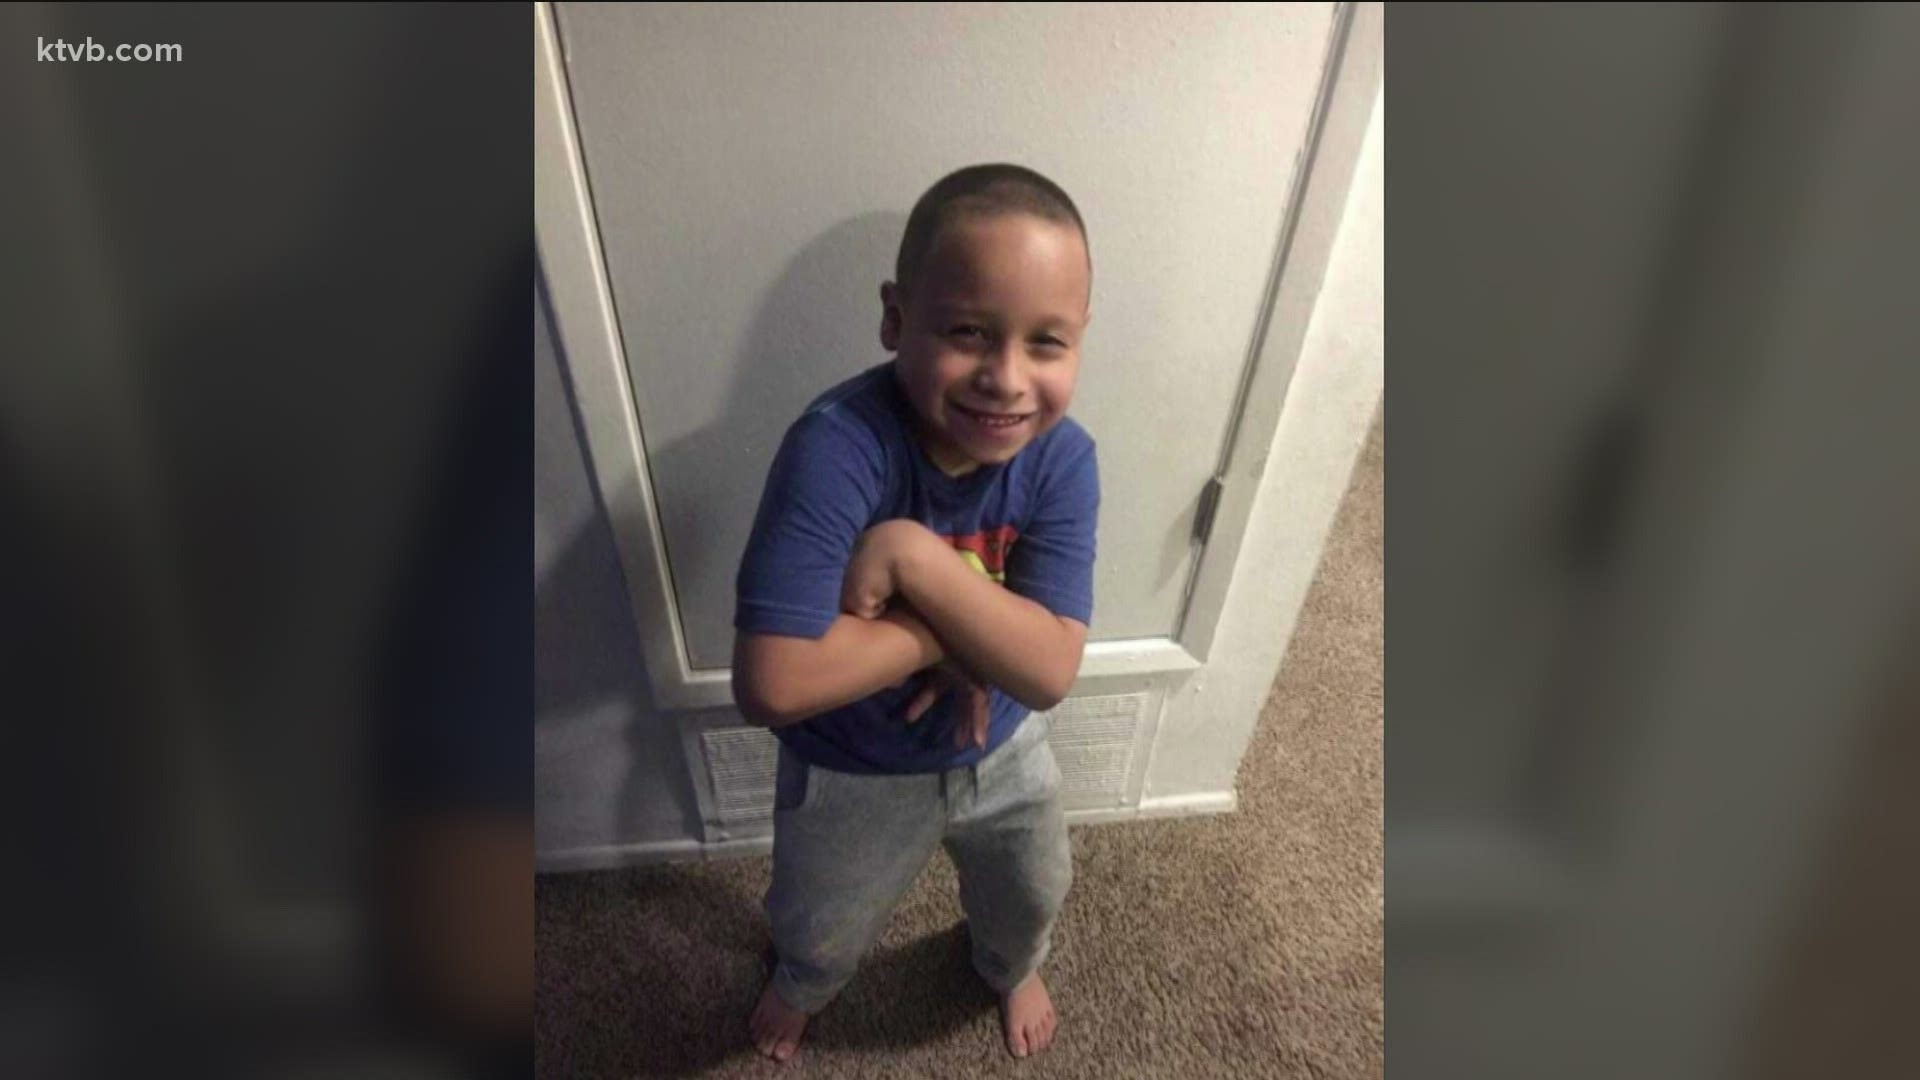 Emrik Osuna died in the pediatric ICU at St. Luke's after he was found without a pulse inside his family's apartment in Meridian Tuesday.